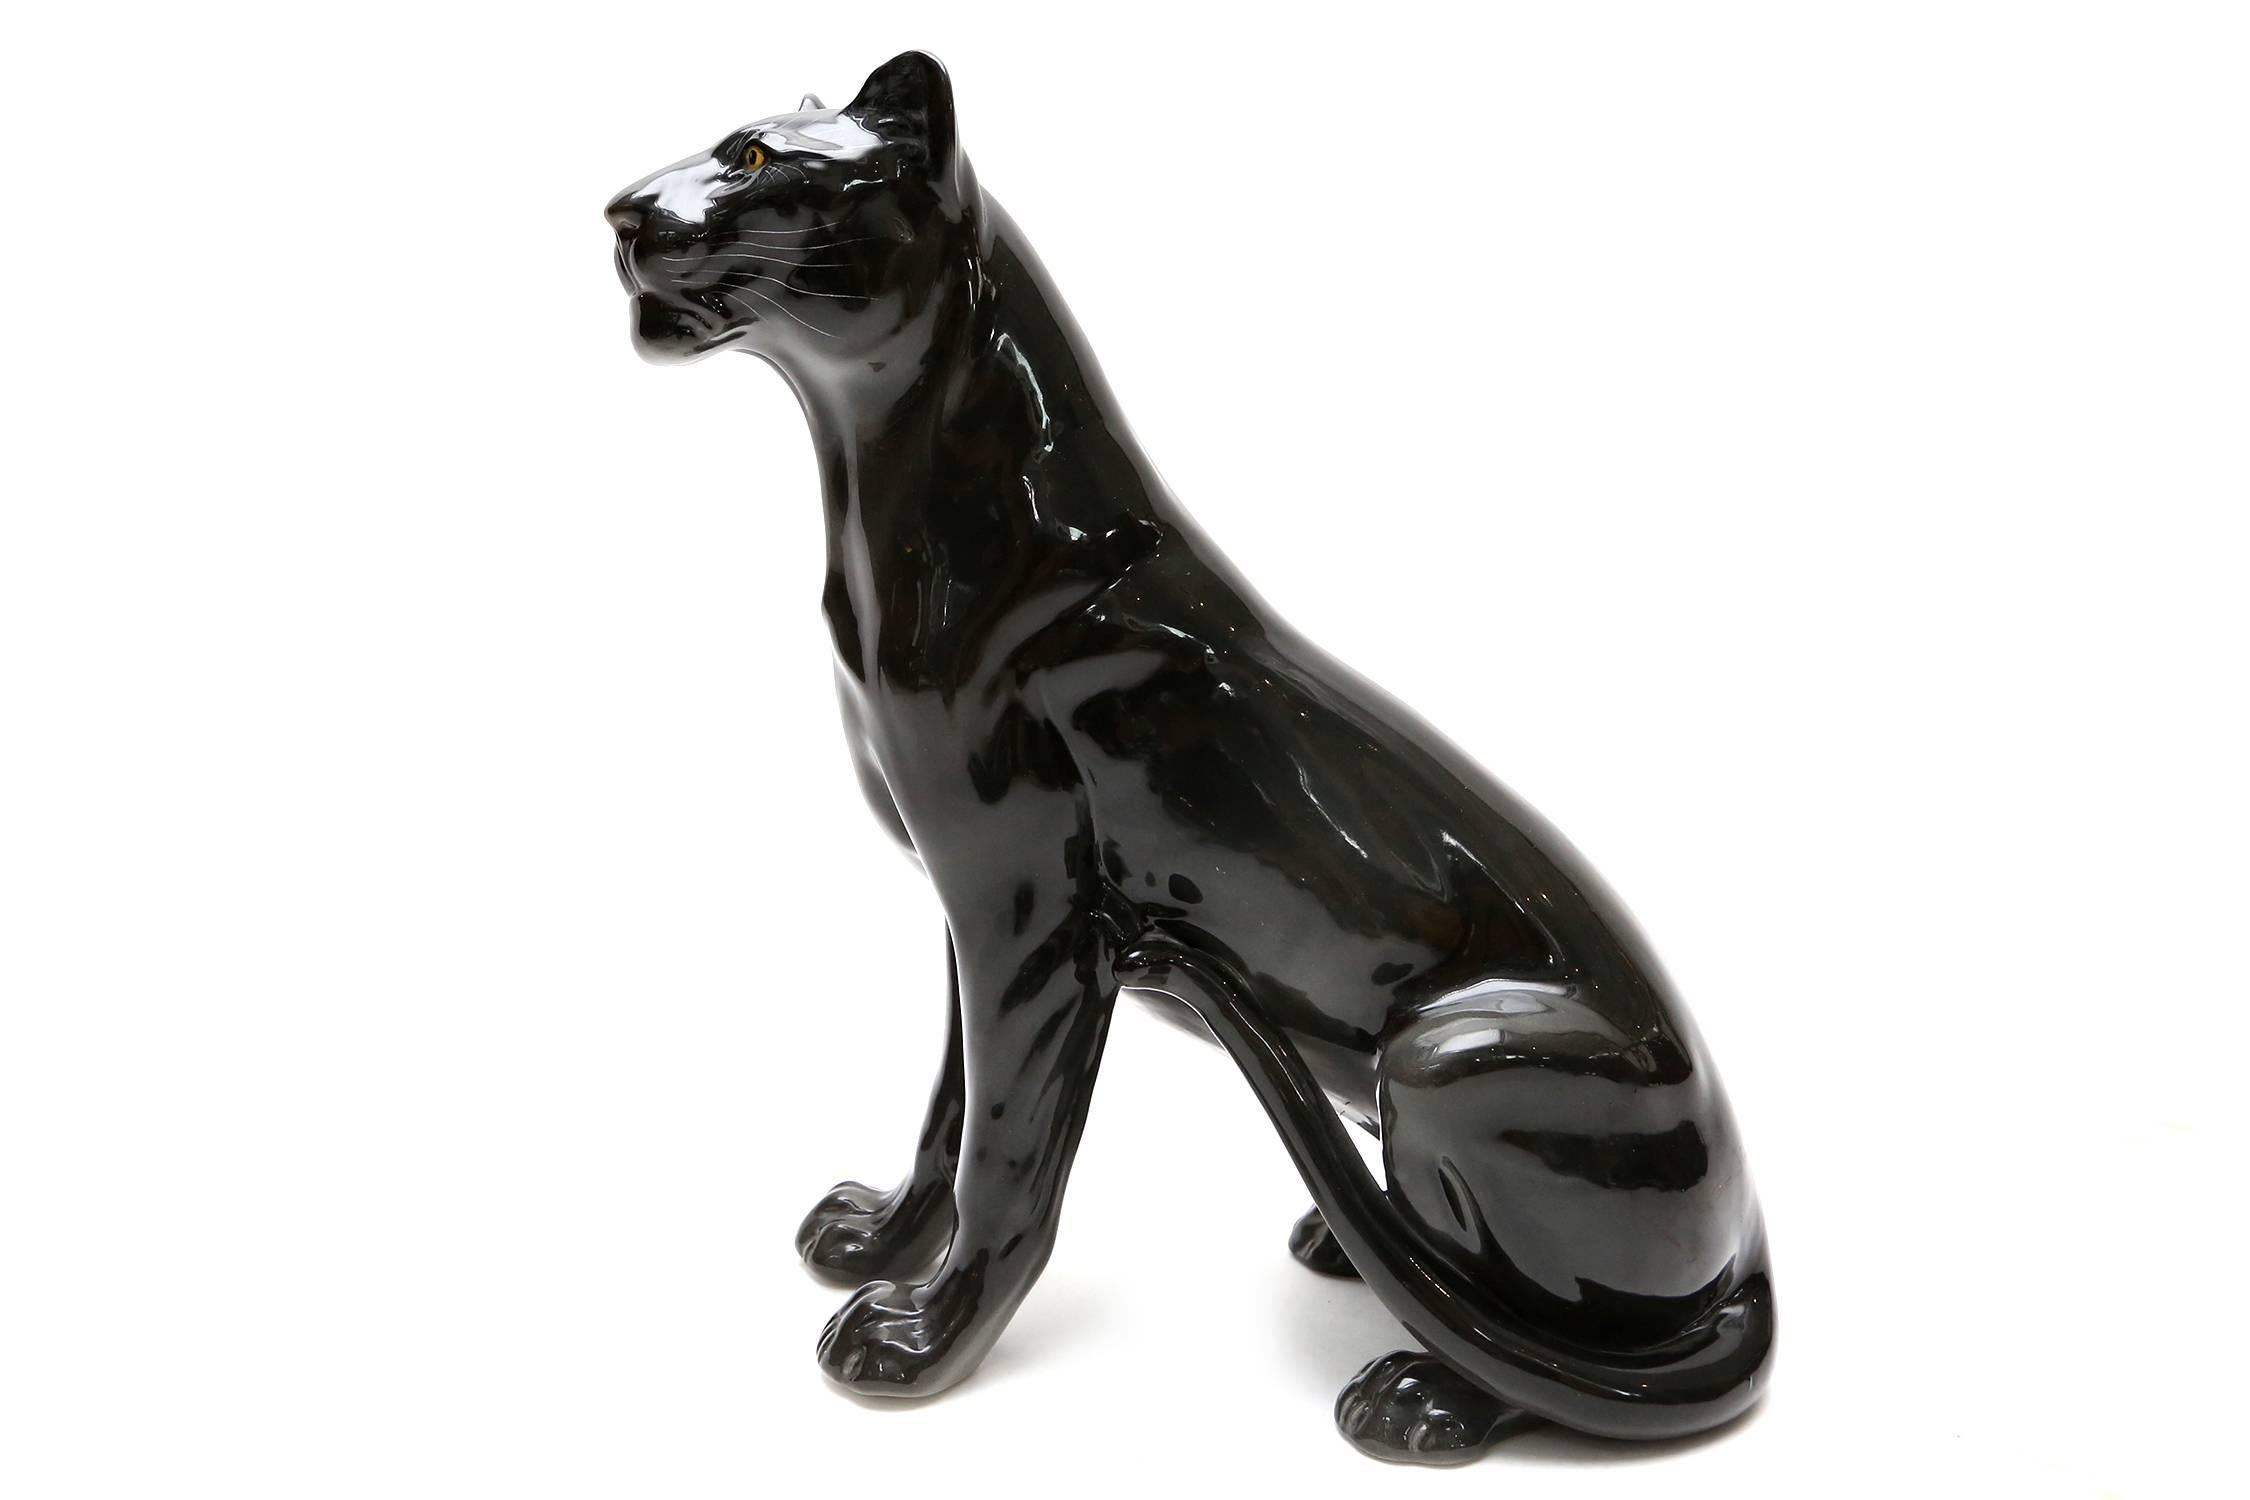 Black glazed ceramic panther,
Italy, circa 1970.
Signed by the artist.
W 15 cm, L 30 cm, H 38 cm.